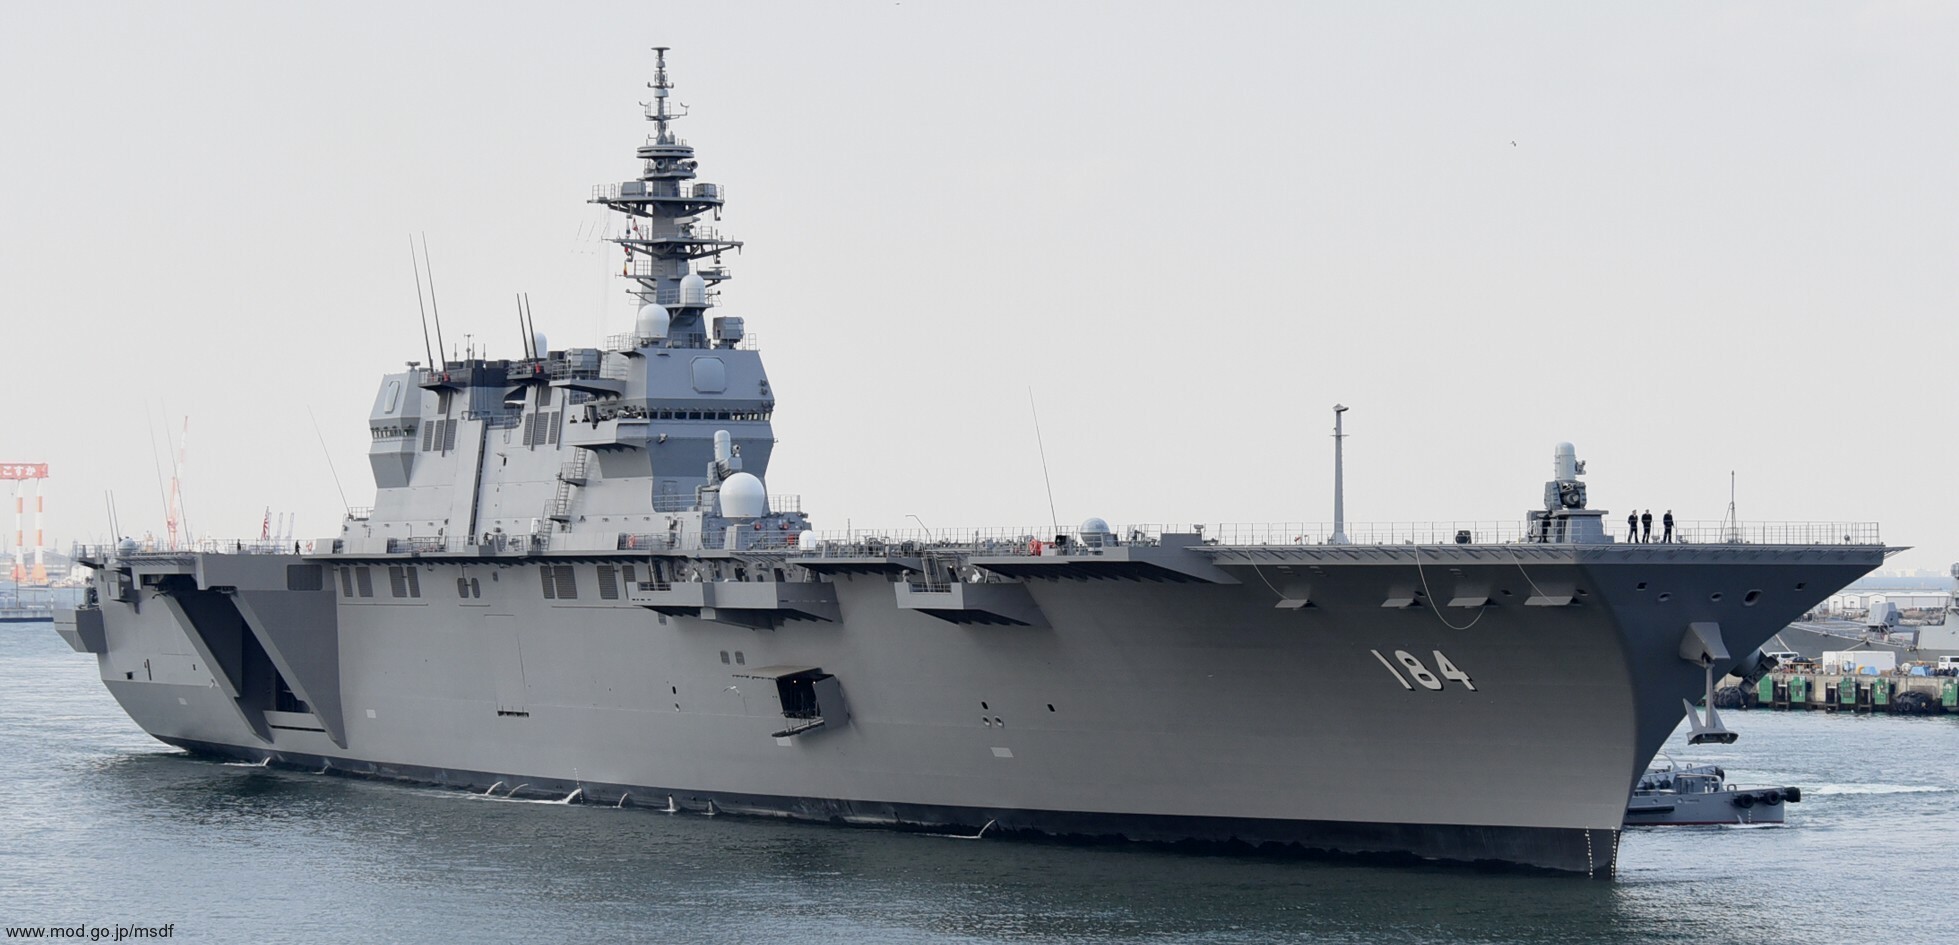 ddh-184 js kaga izumo class helicopter destroyer japan maritime self defense force jmsdf 03x marine united aircraft carrier